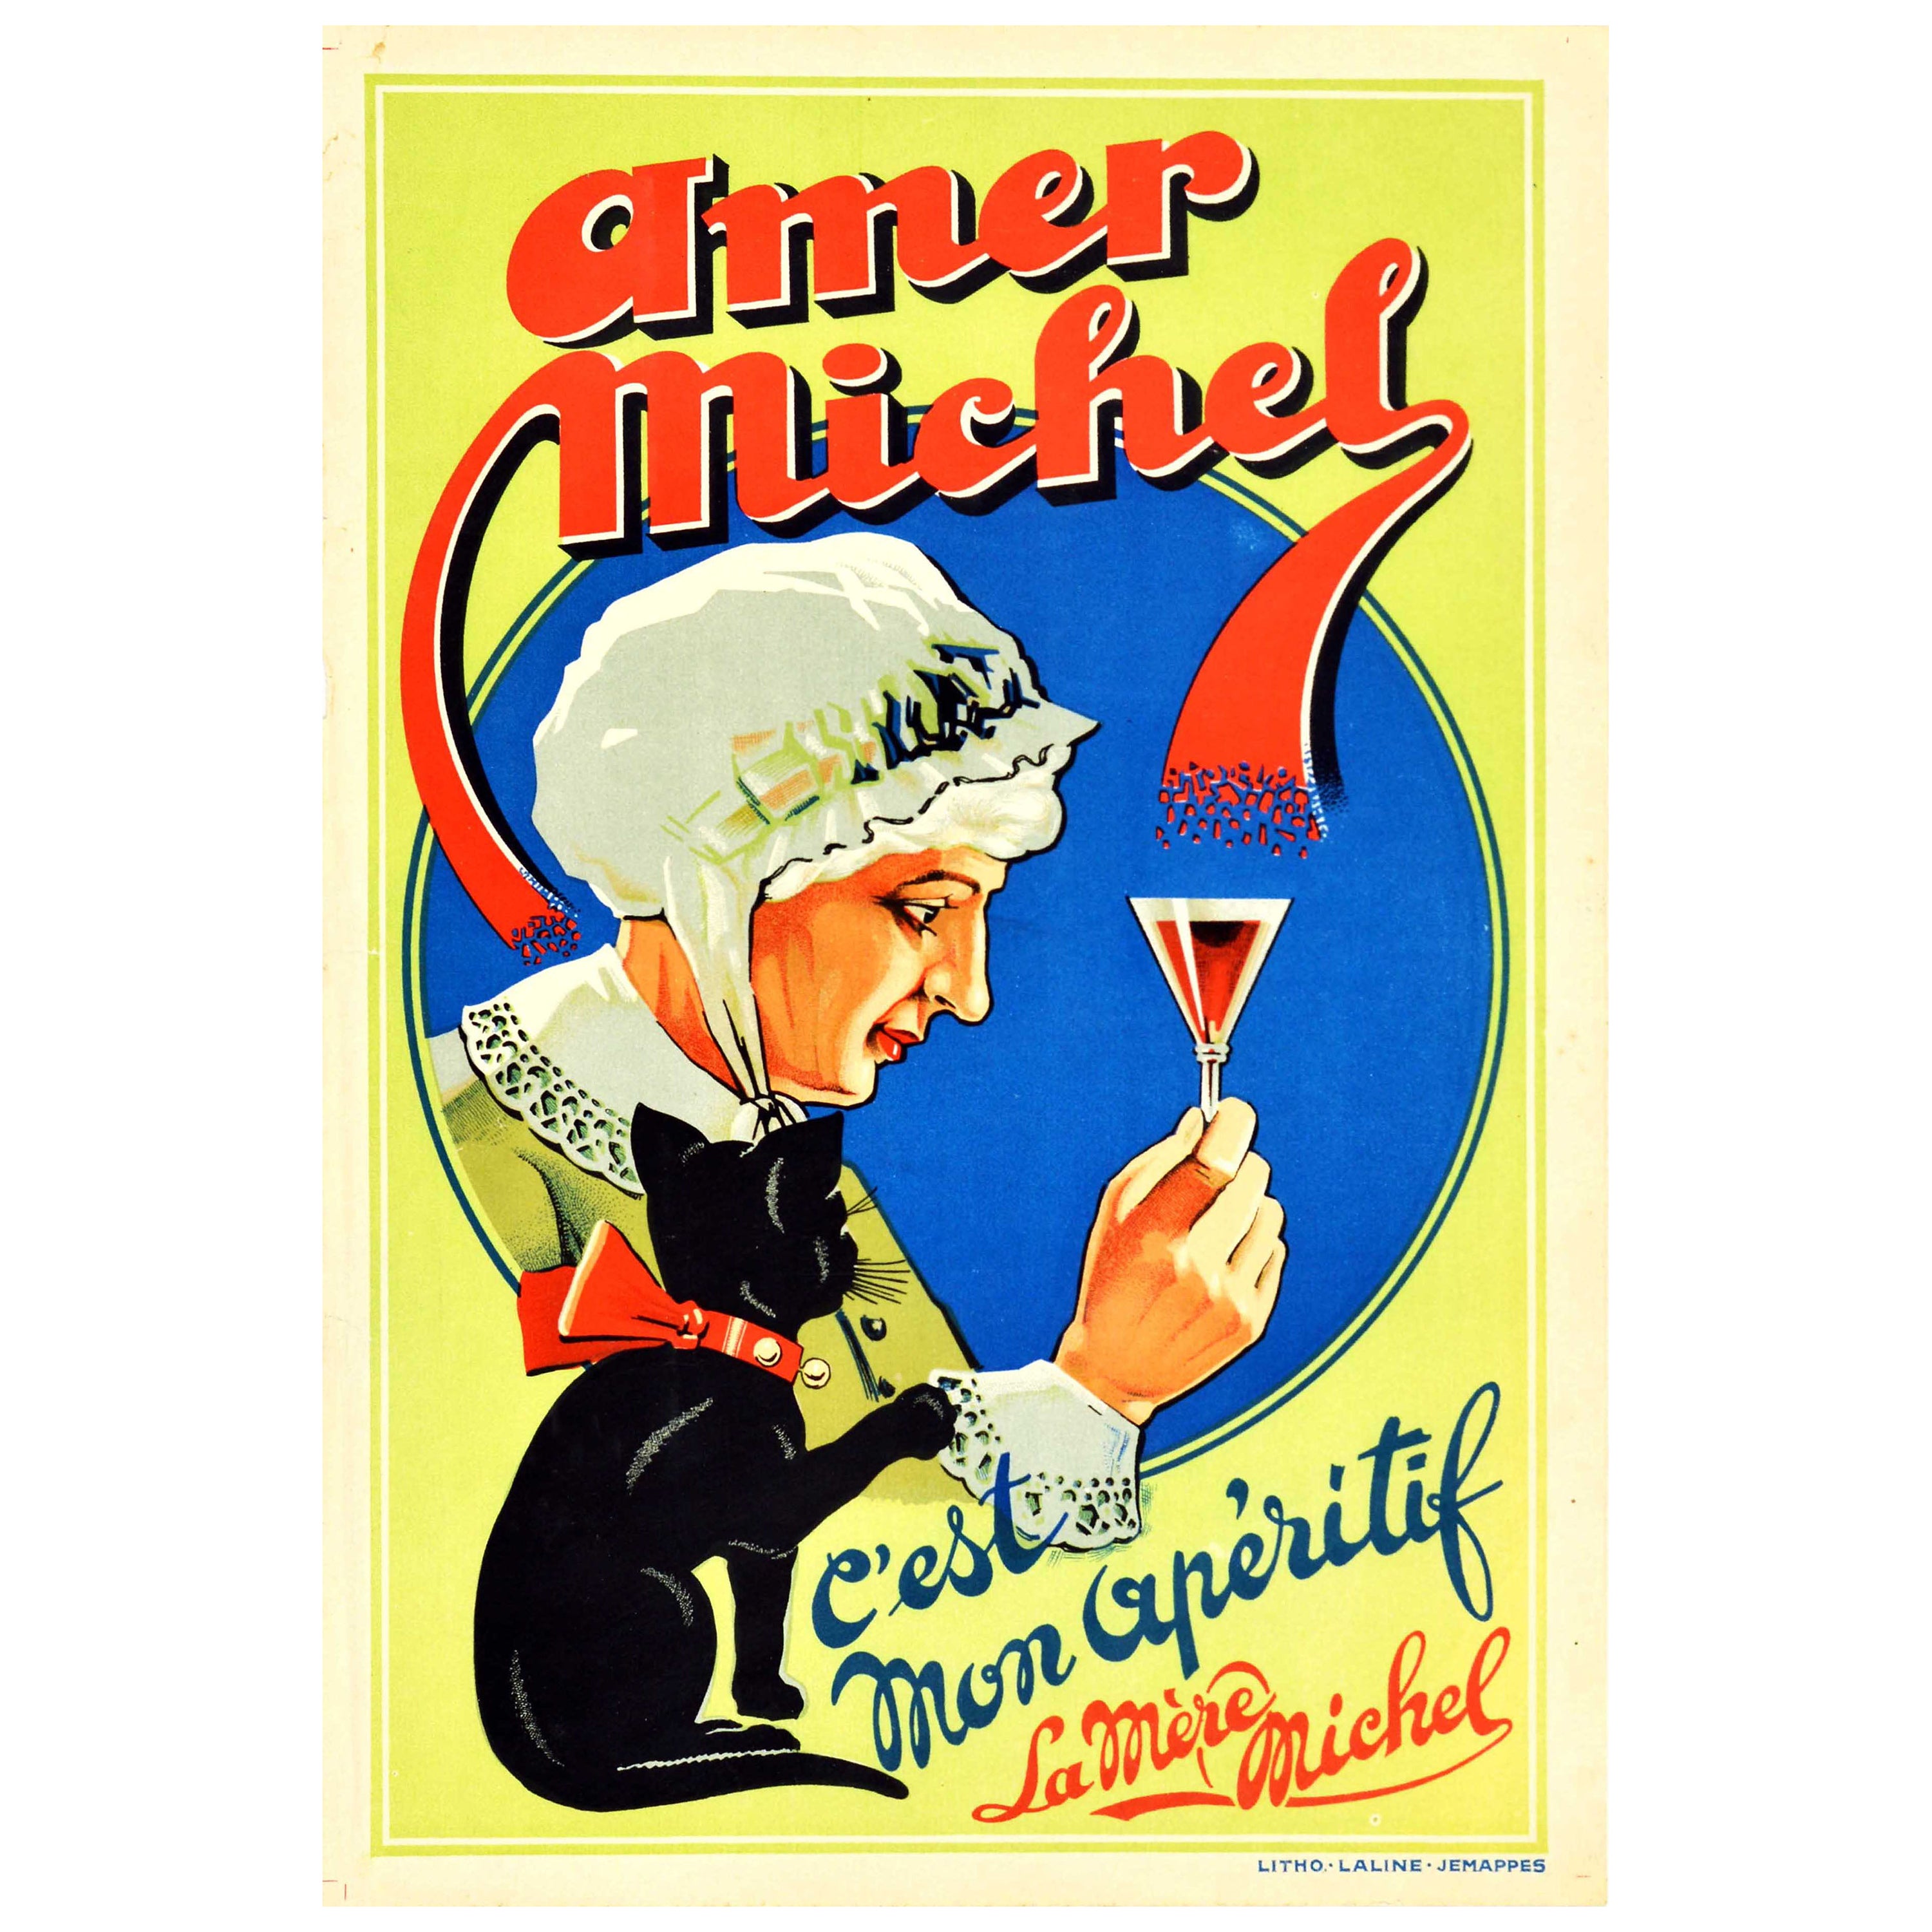 1920s Posters